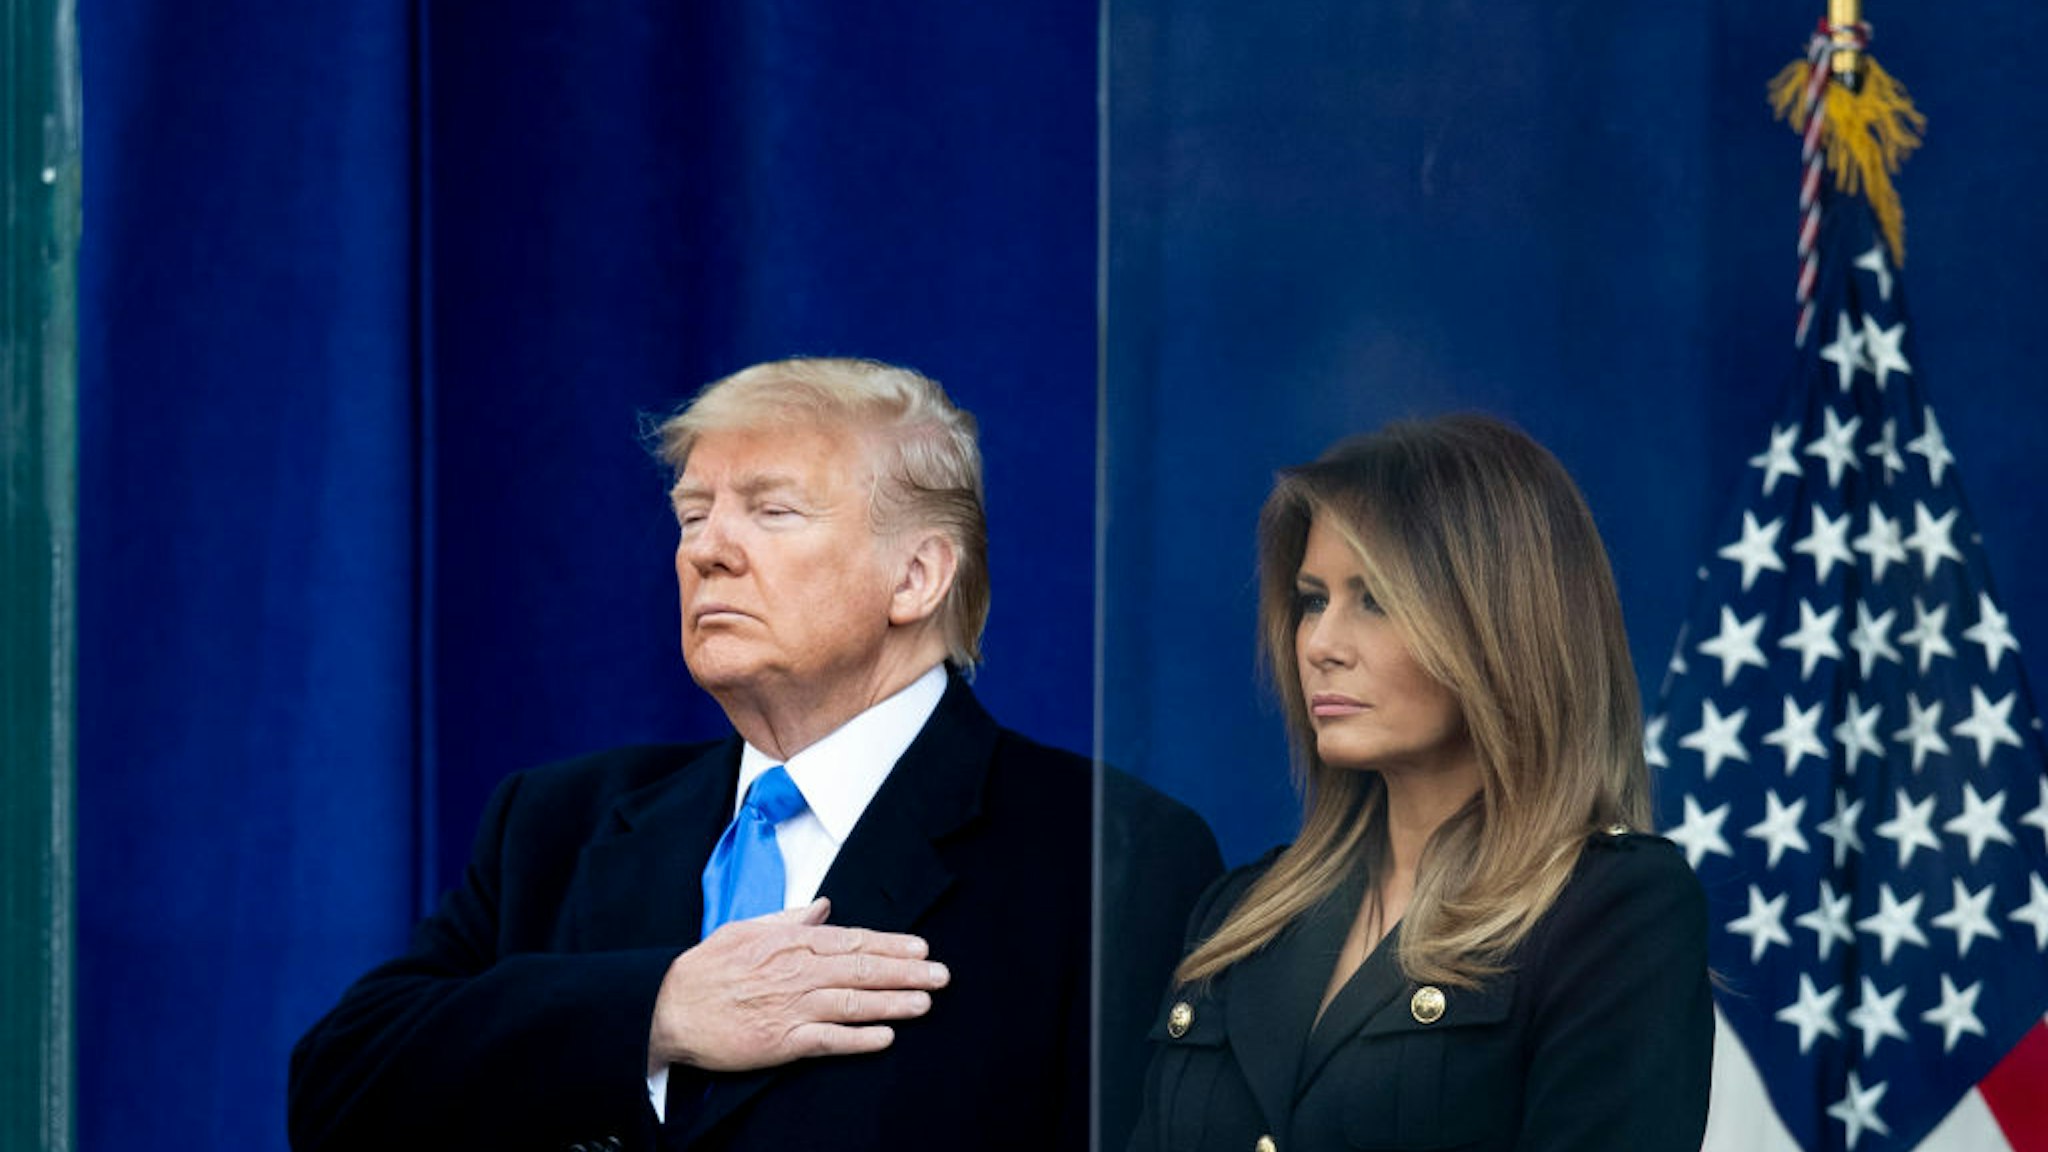 The 45th President Donald J. Trump with his had on his heart and the First Lady Melania Trump with her arms at her side after he addressed the crowd during his opening ceremony of the New York City 100th annual Veterans Day Parade and wreath-laying at the Eternal Light Flag Staff.